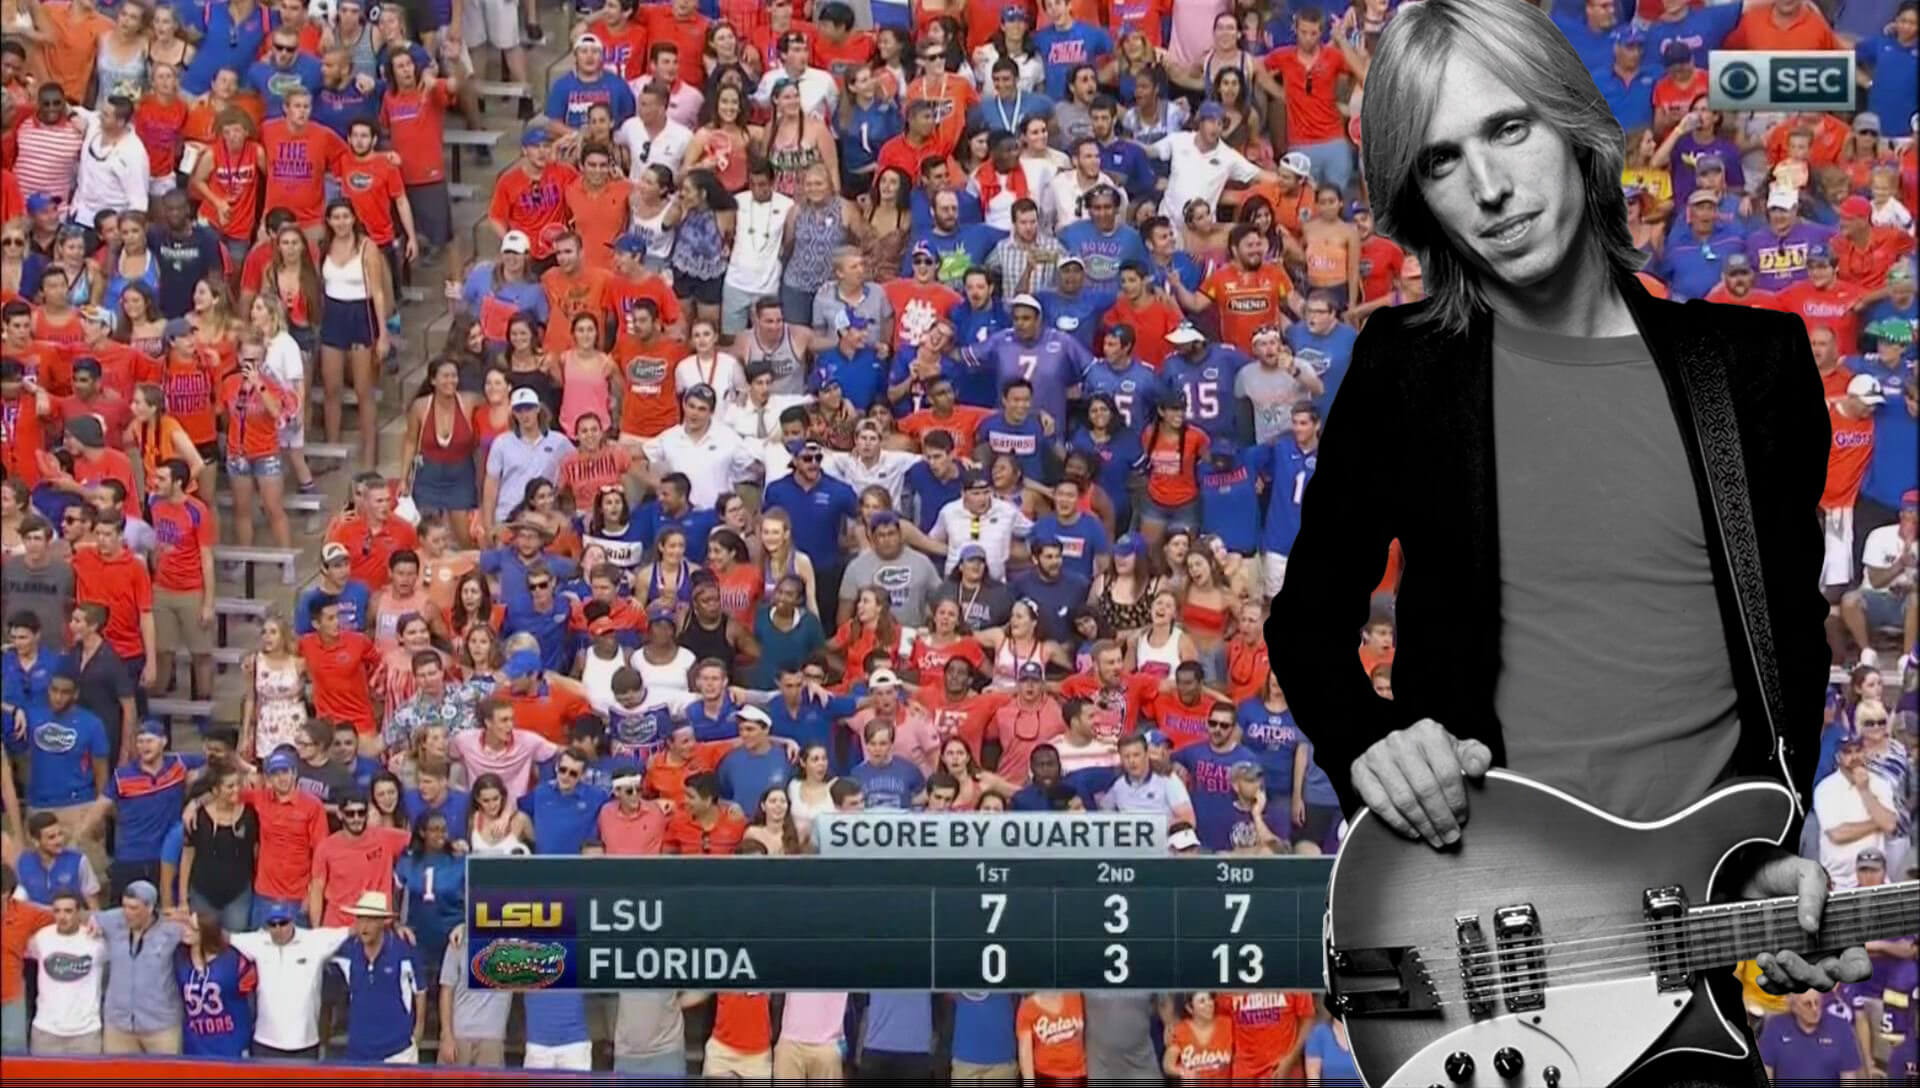 Watch Florida fans singing Tom Petty’s “I Won’t Back Down” on the stadium